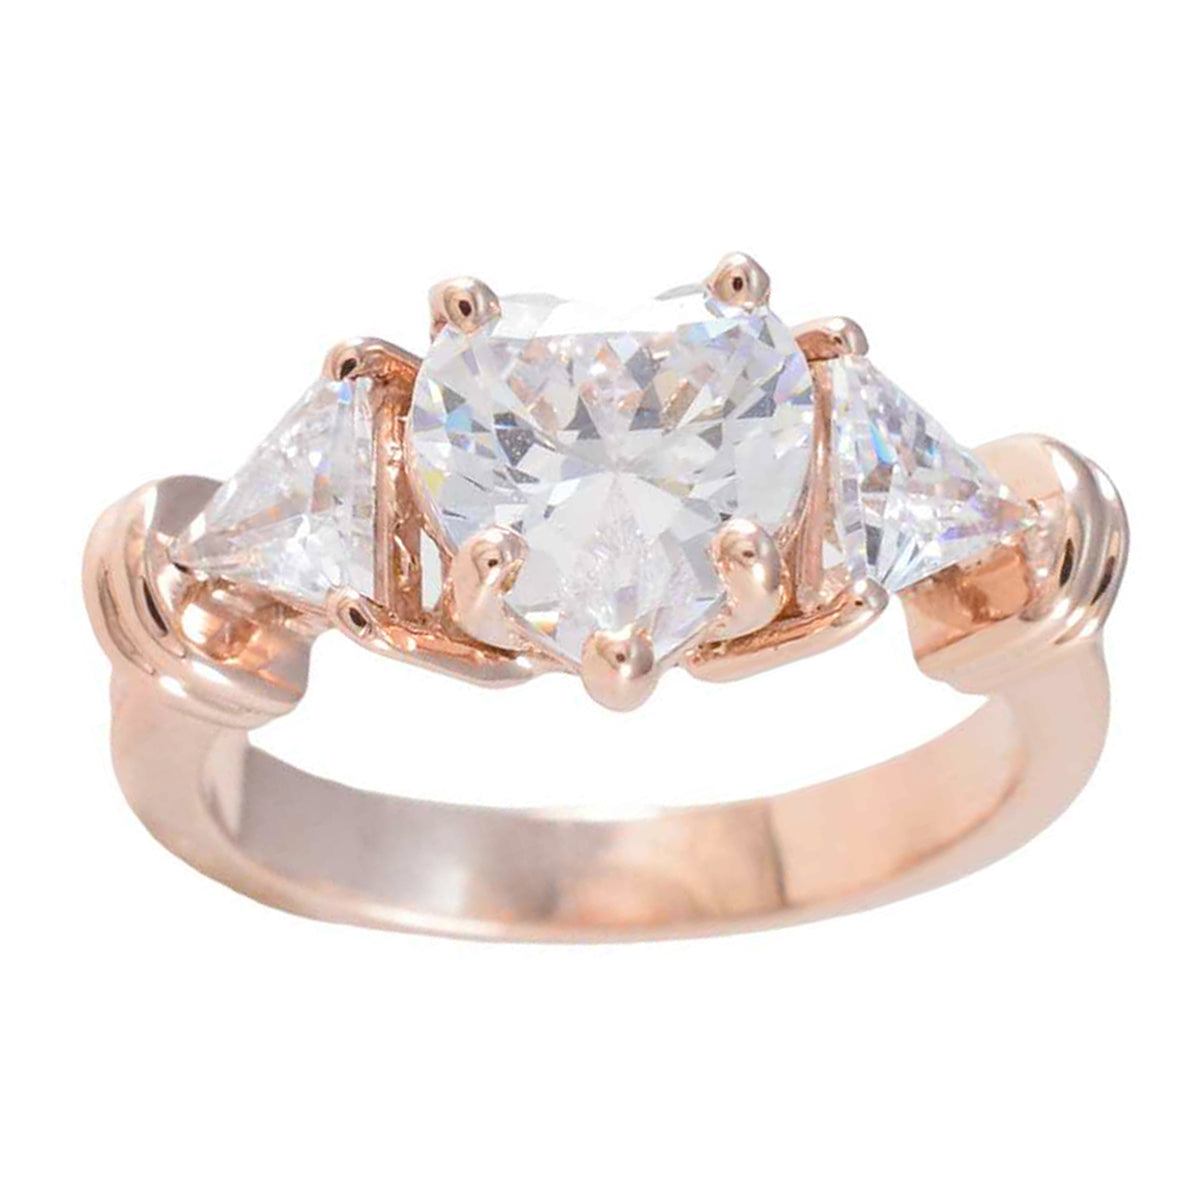 Riyo Jaipur Silver Ring With Rose Gold Plating White CZ Stone Heart Shape Prong Setting Antique Jewelry Graduation Ring